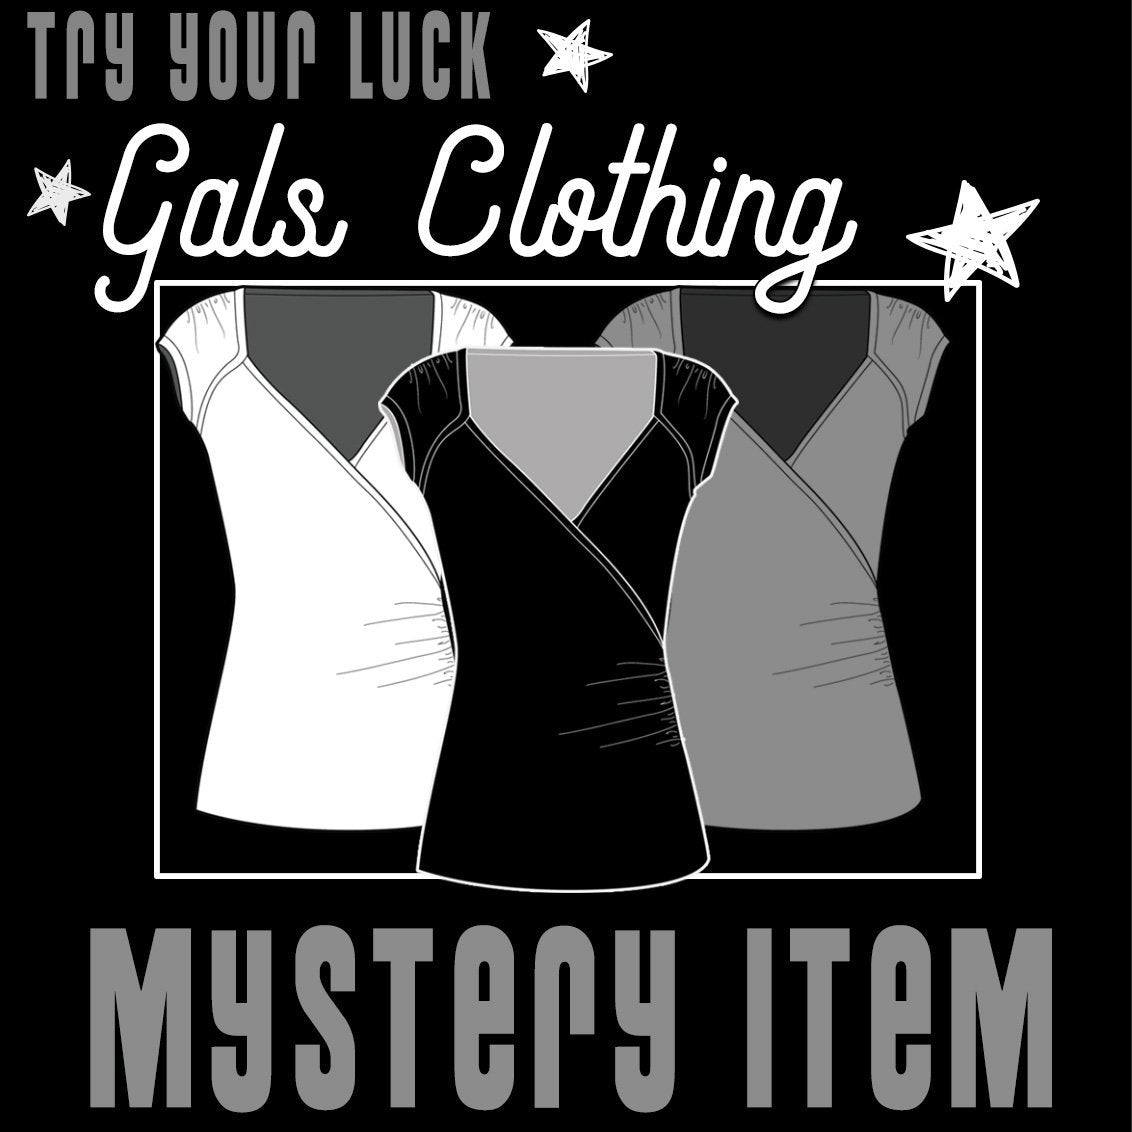 Mystery Clothing.